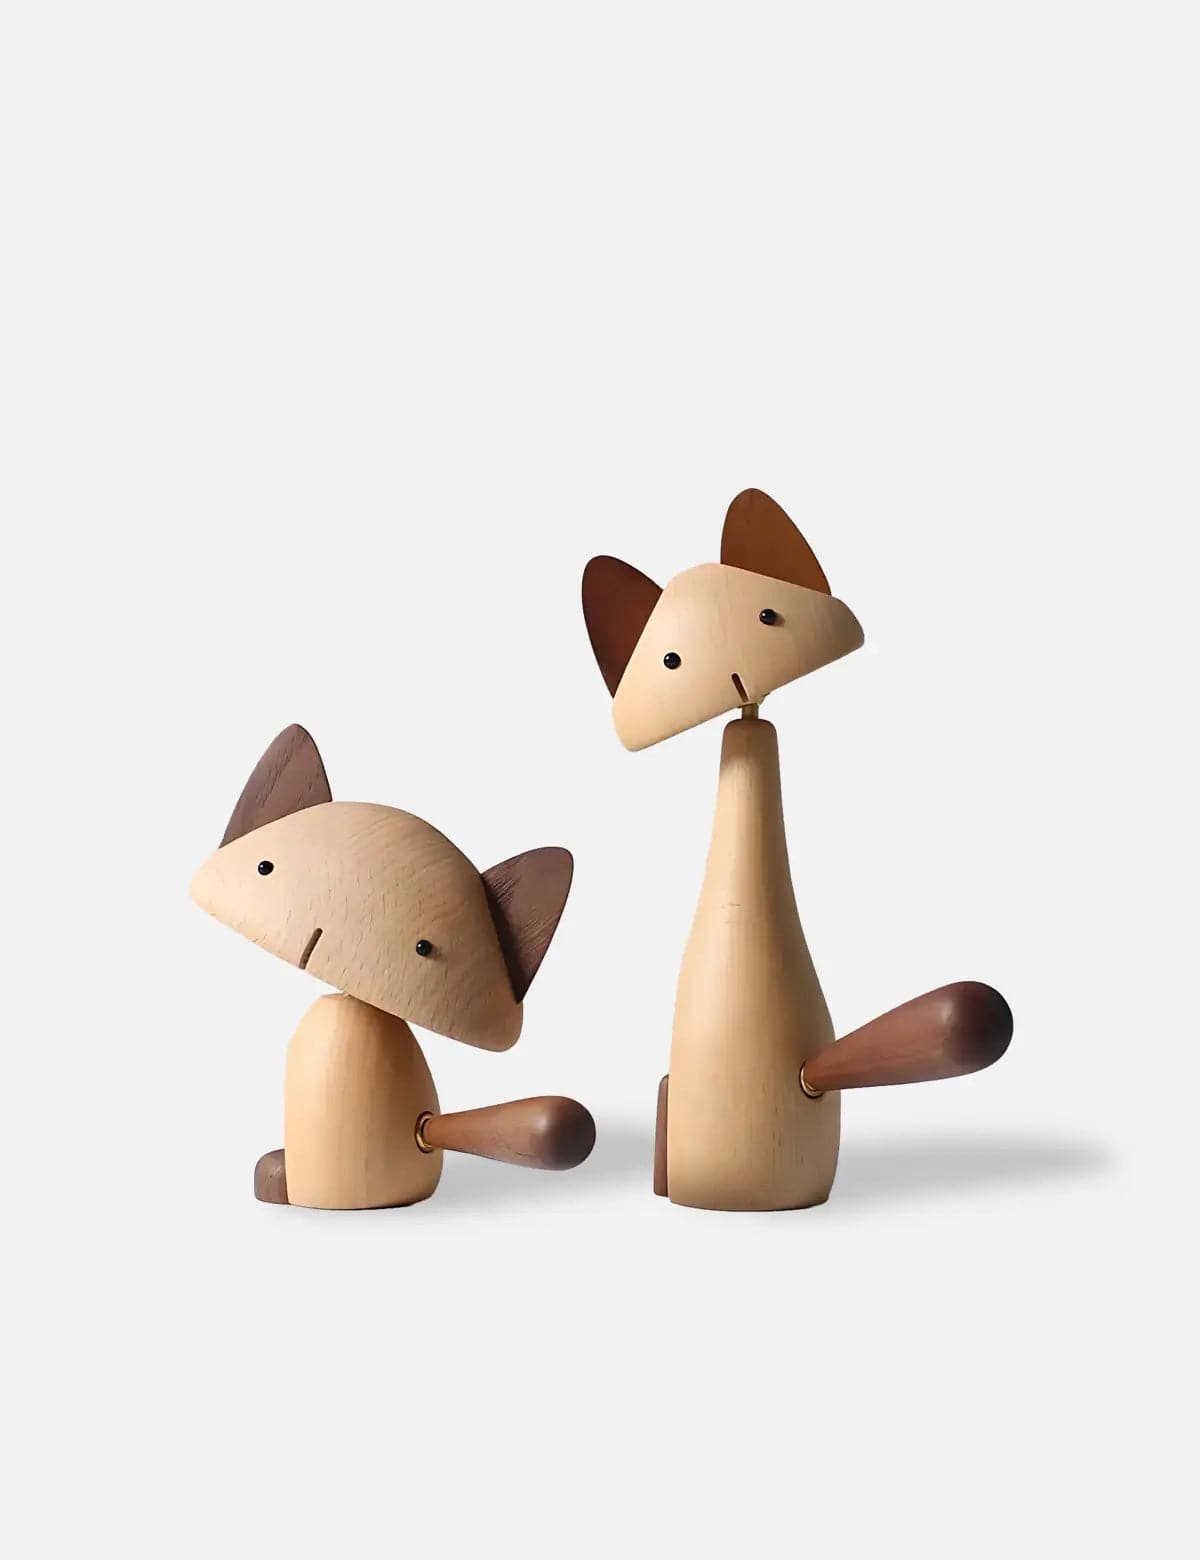 artisan-wood-cat-statue-home-accent-09